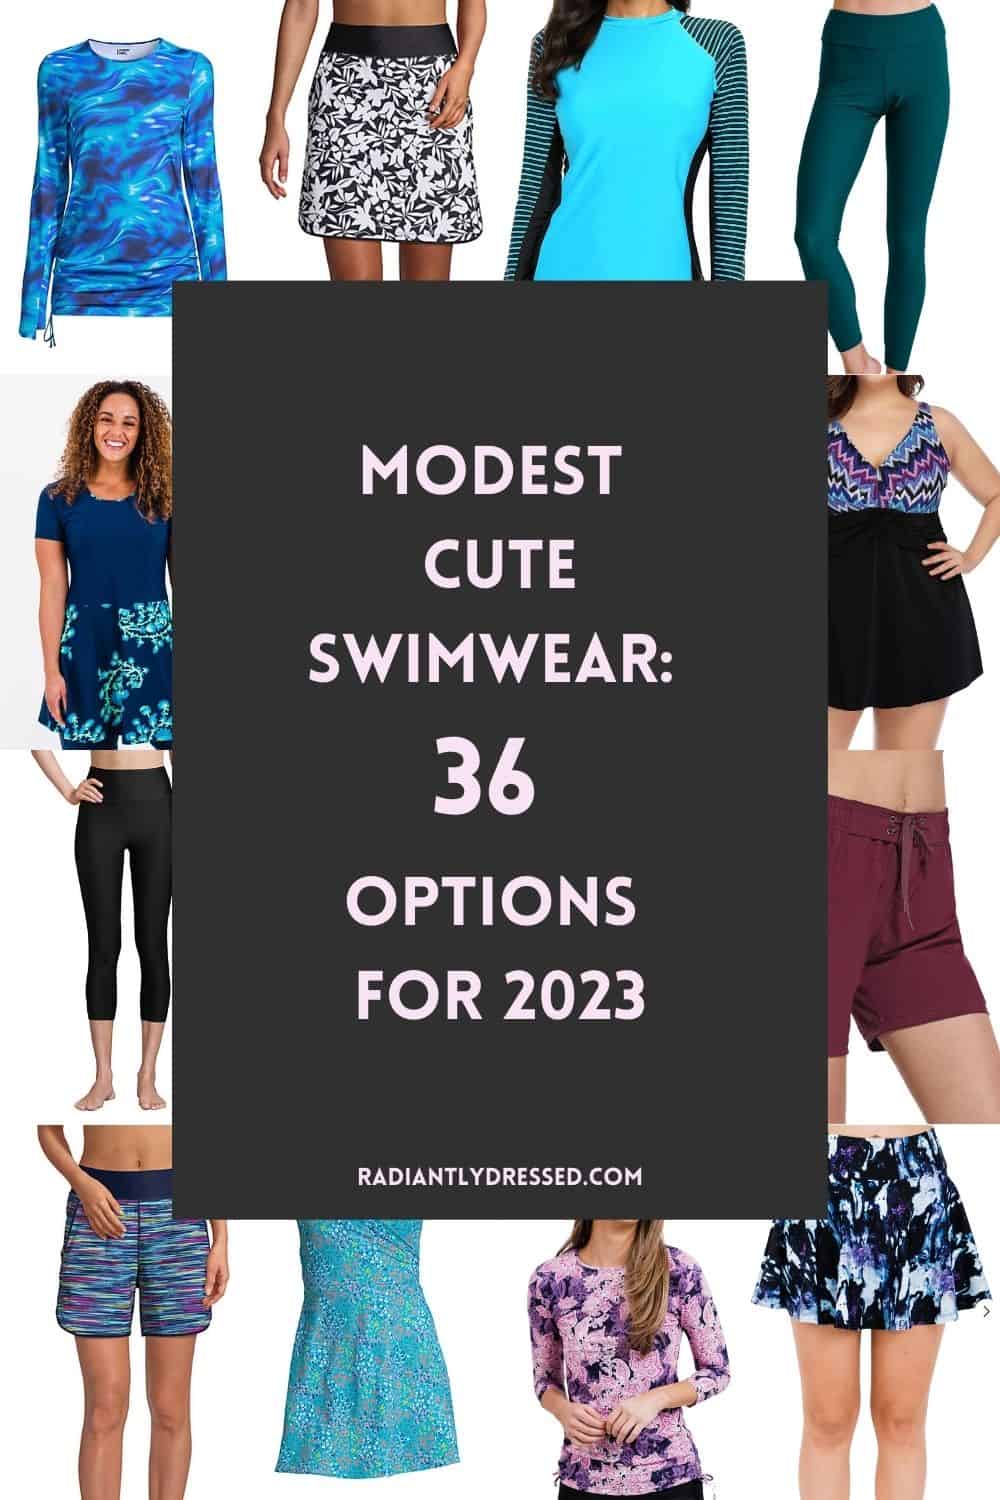 10 Sites For Cute Modest Swimsuits + Our 2023 Picks! - This Blue Dress